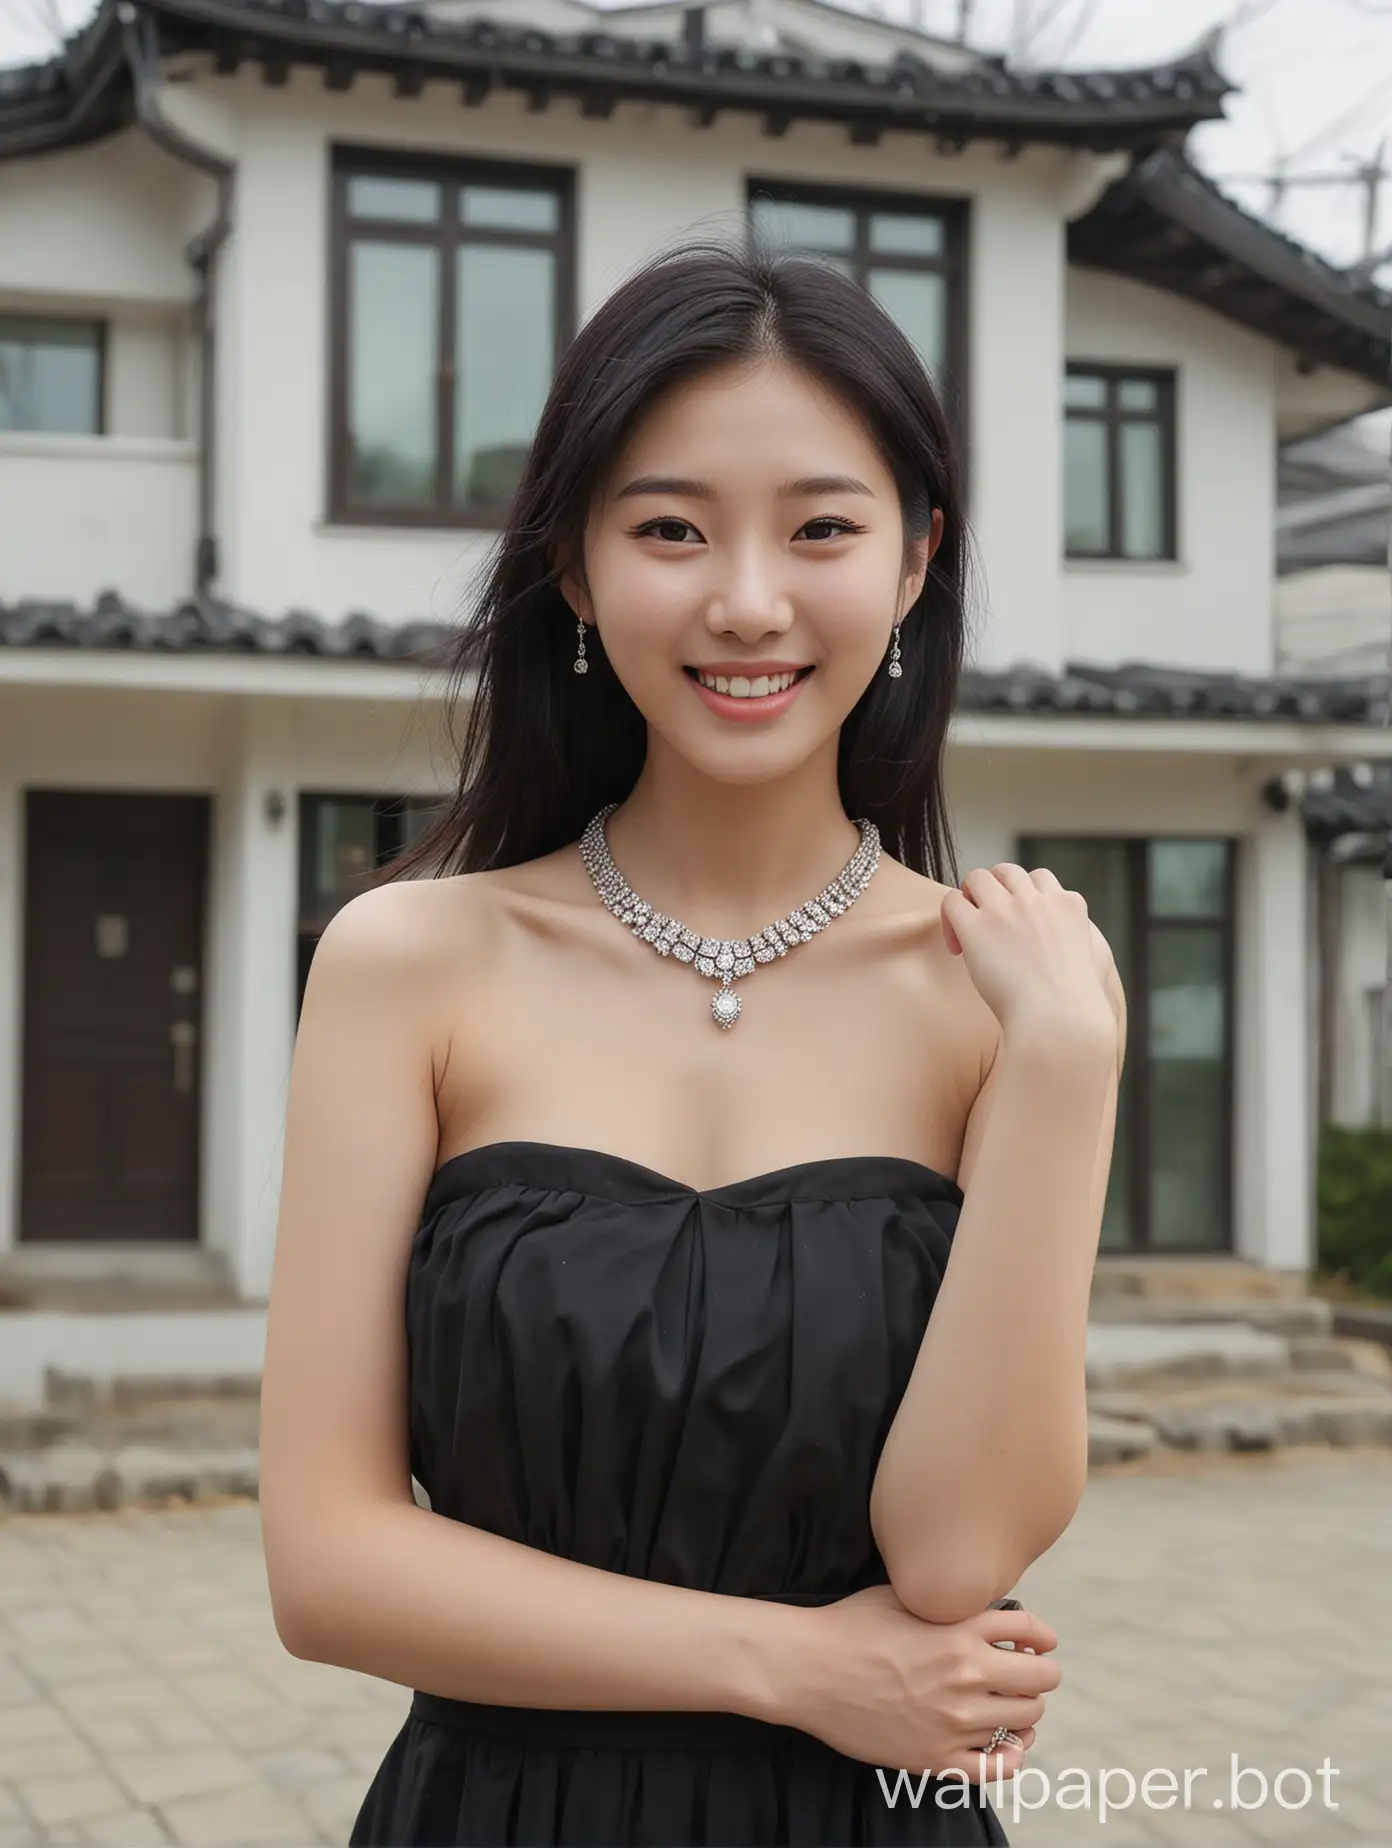 Generate an image of a beautiful South Korean Gyeonggi-dol cute pretty girl with a fair skin tone and long black hair. She has a joyful smile, a warm, broad smile that conveys happiness. The background is a modern house. The camera shot captures her from head to foot, full shot. She is wearing an elegant diamond necklace, exuding glamour.